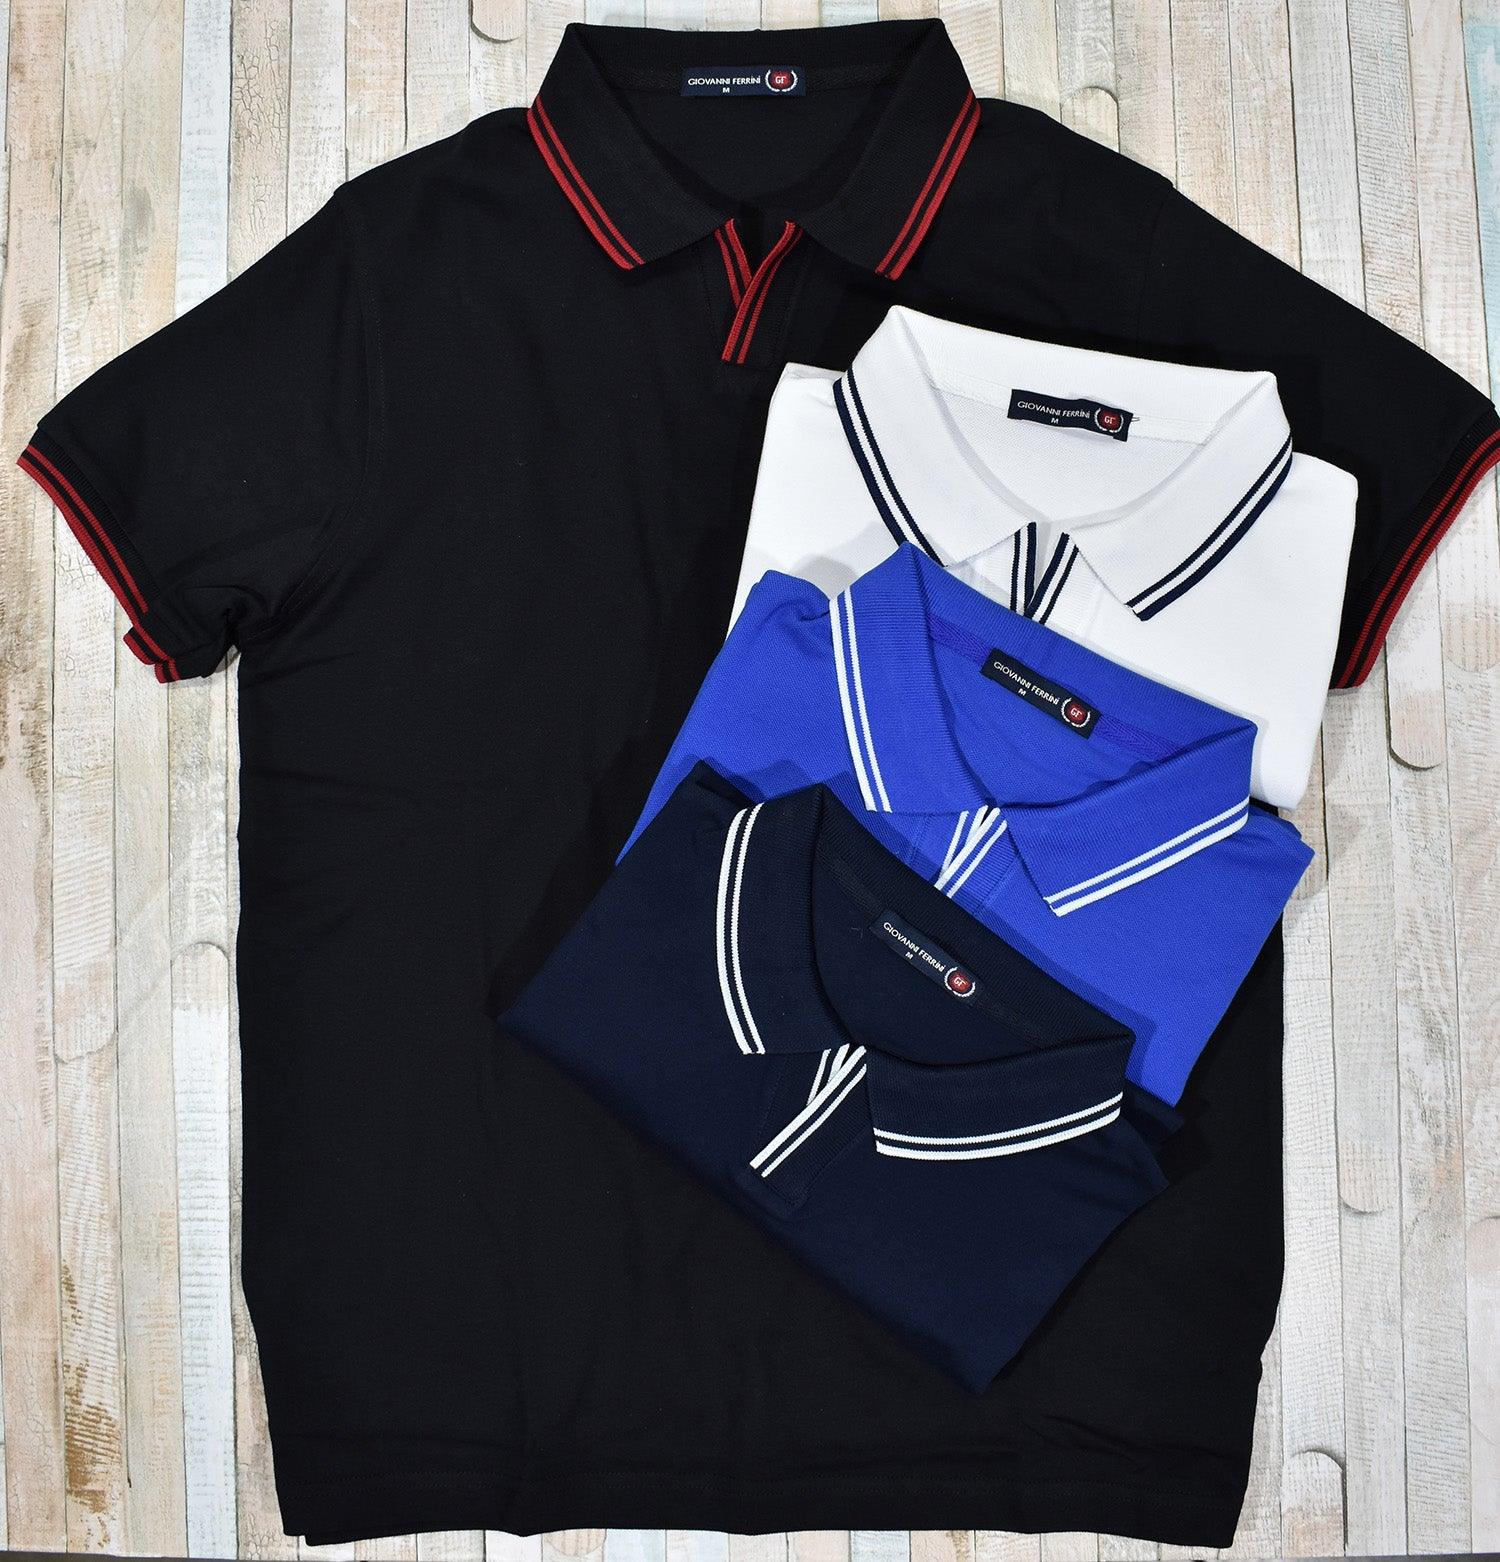 When your basic polo just won't cut it out on the town or for a date, this stylish polo sports and made of style and sophistication.  Soft cotton pique with a touch of Lycra for stretch comfort. Open collar lays nicely without buttons. Contrast tipping detail on collar, placket and cuffs. Classic fit.